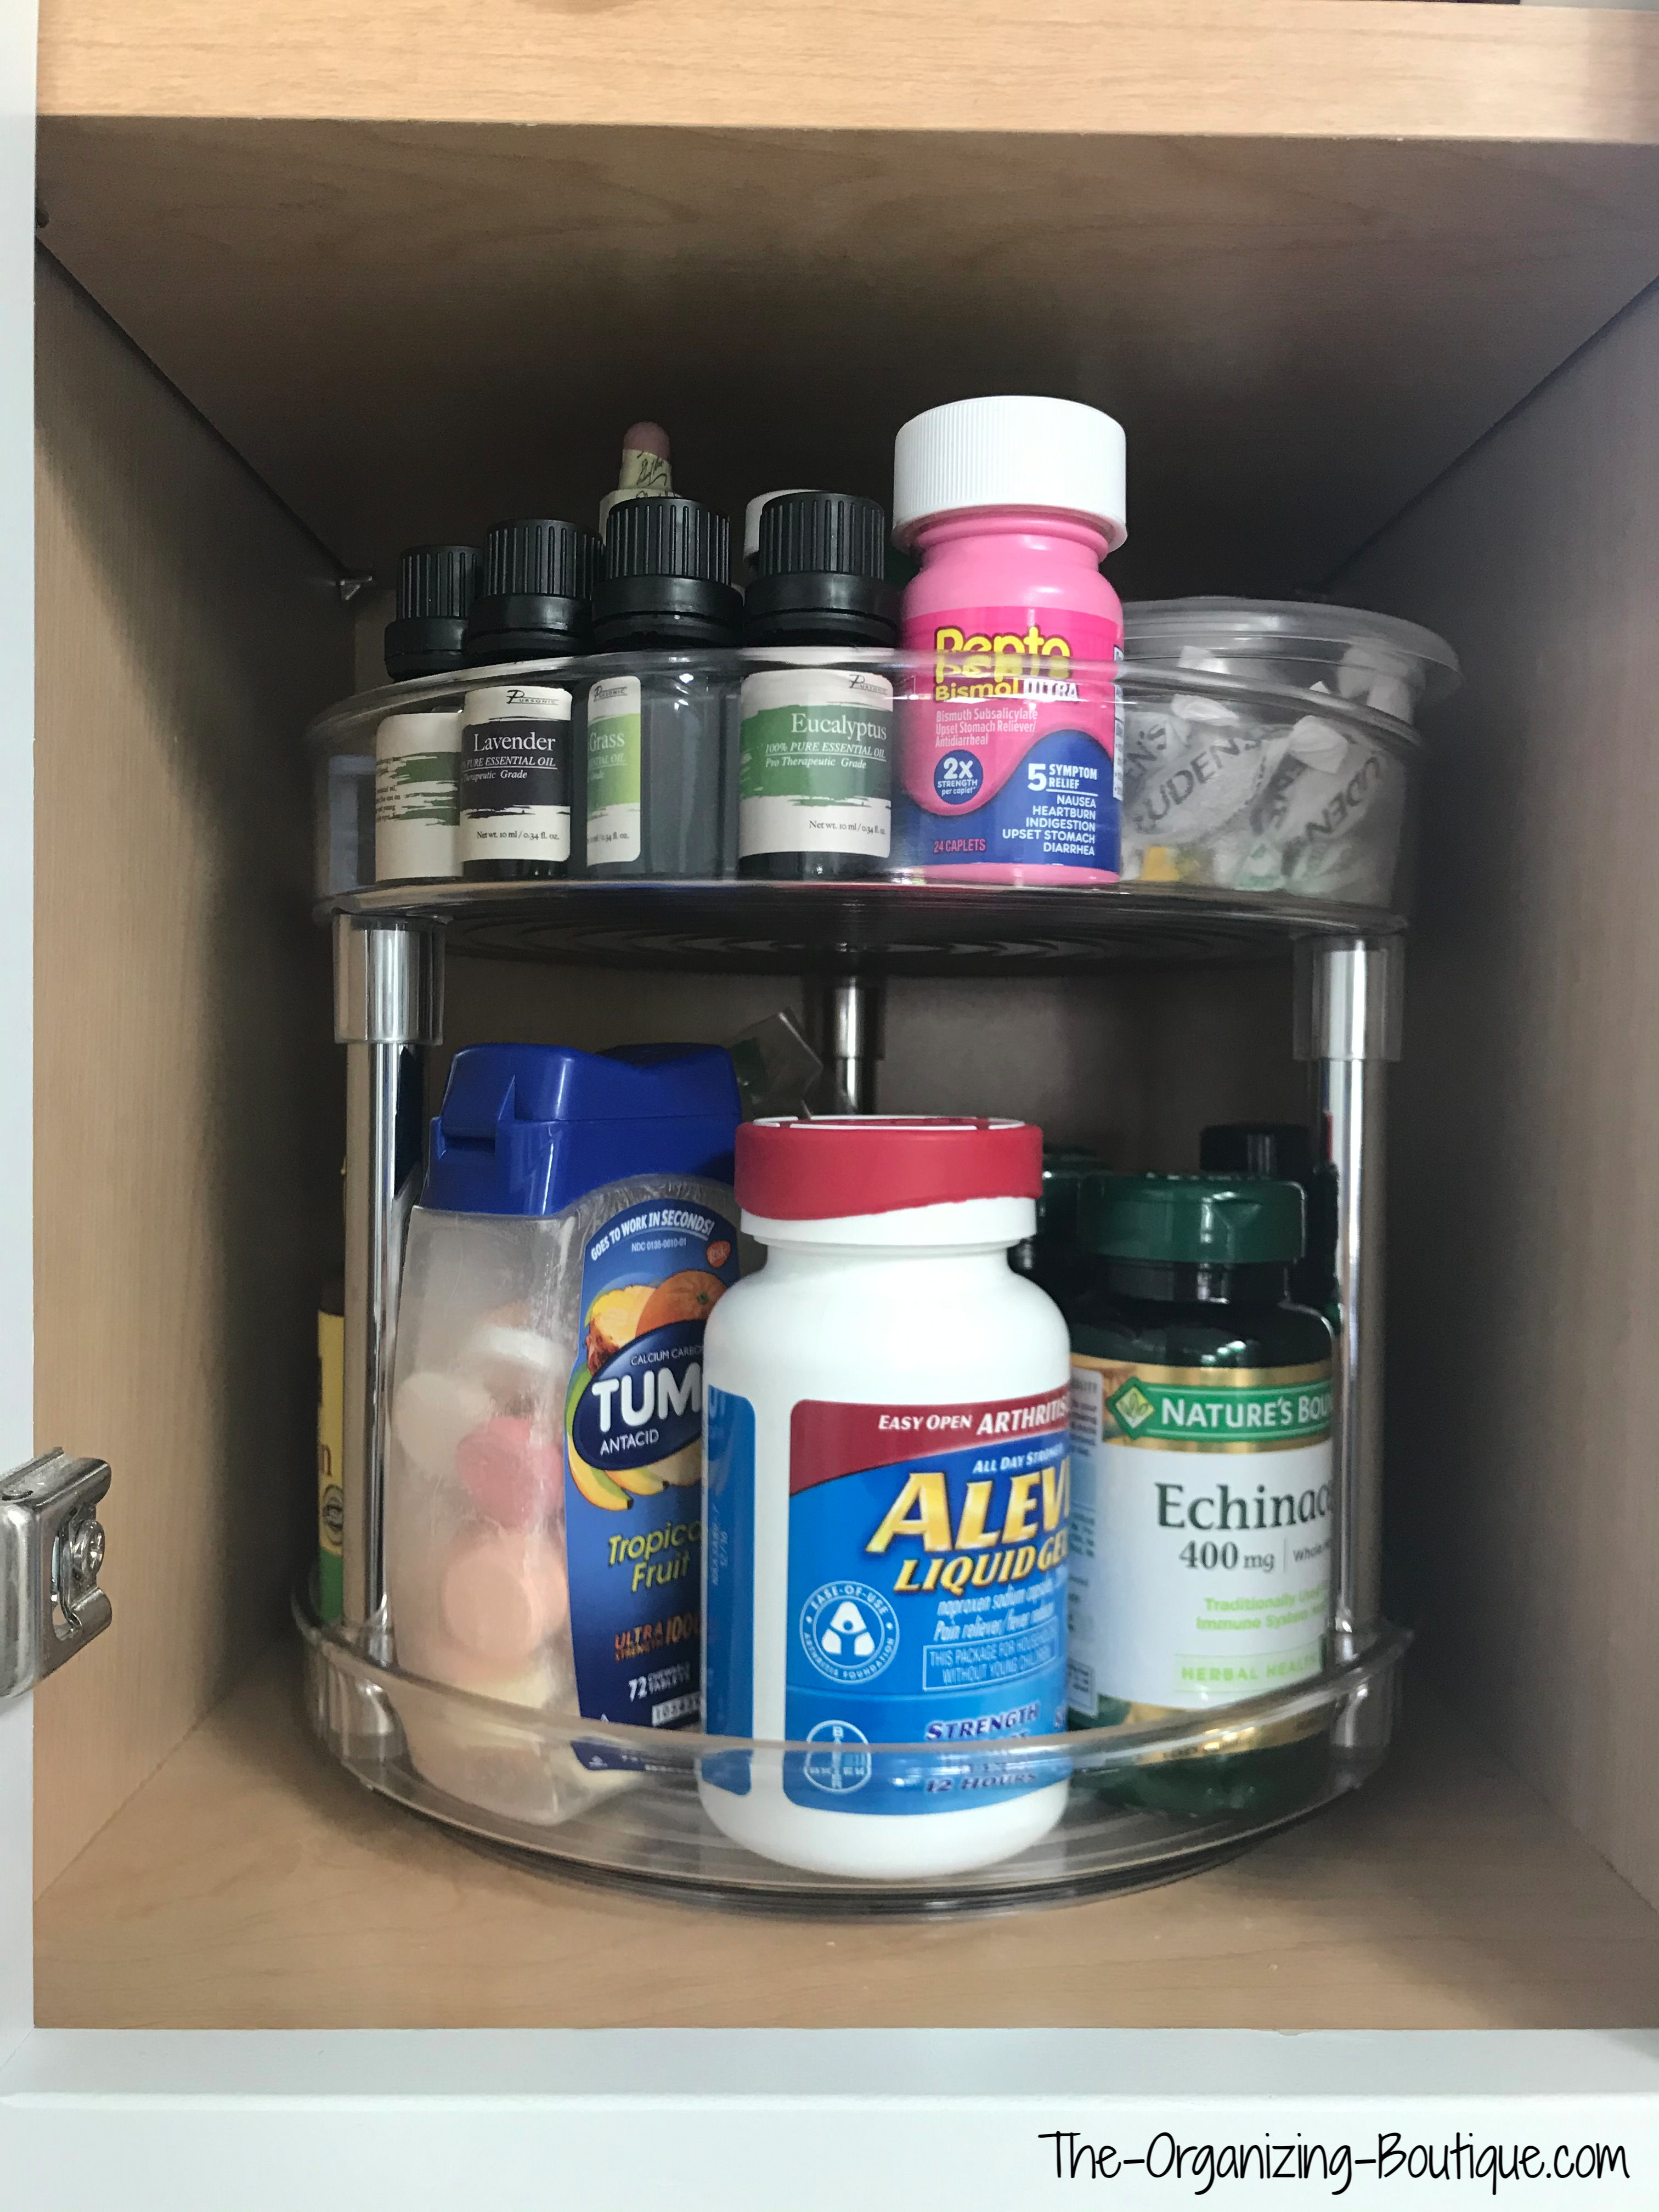 https://www.the-organizing-boutique.com/images/Pill-Turntable-Cabinet.jpg